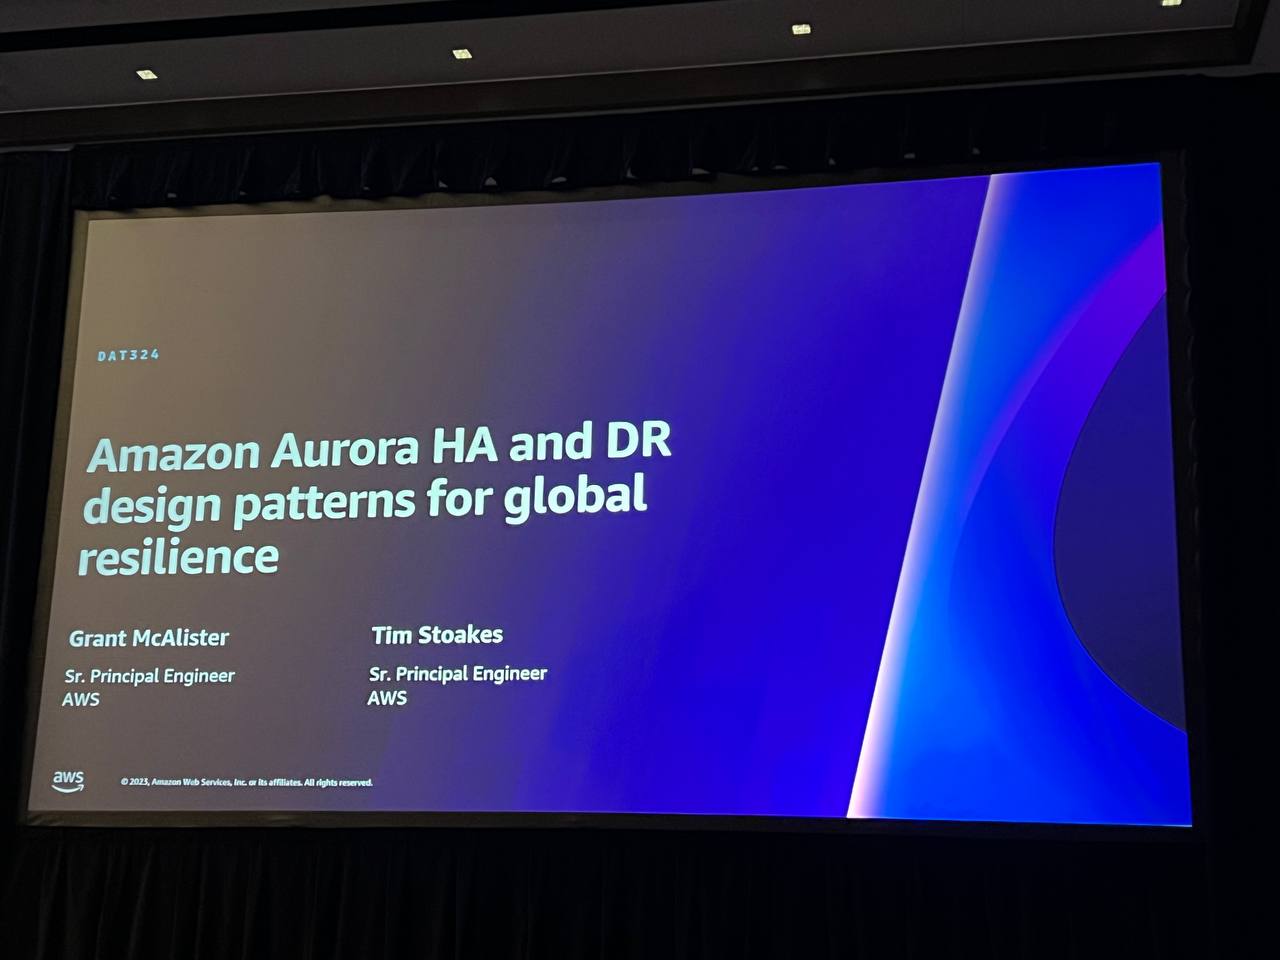 Amazon Aurora HA and DR design patterns for global resilience